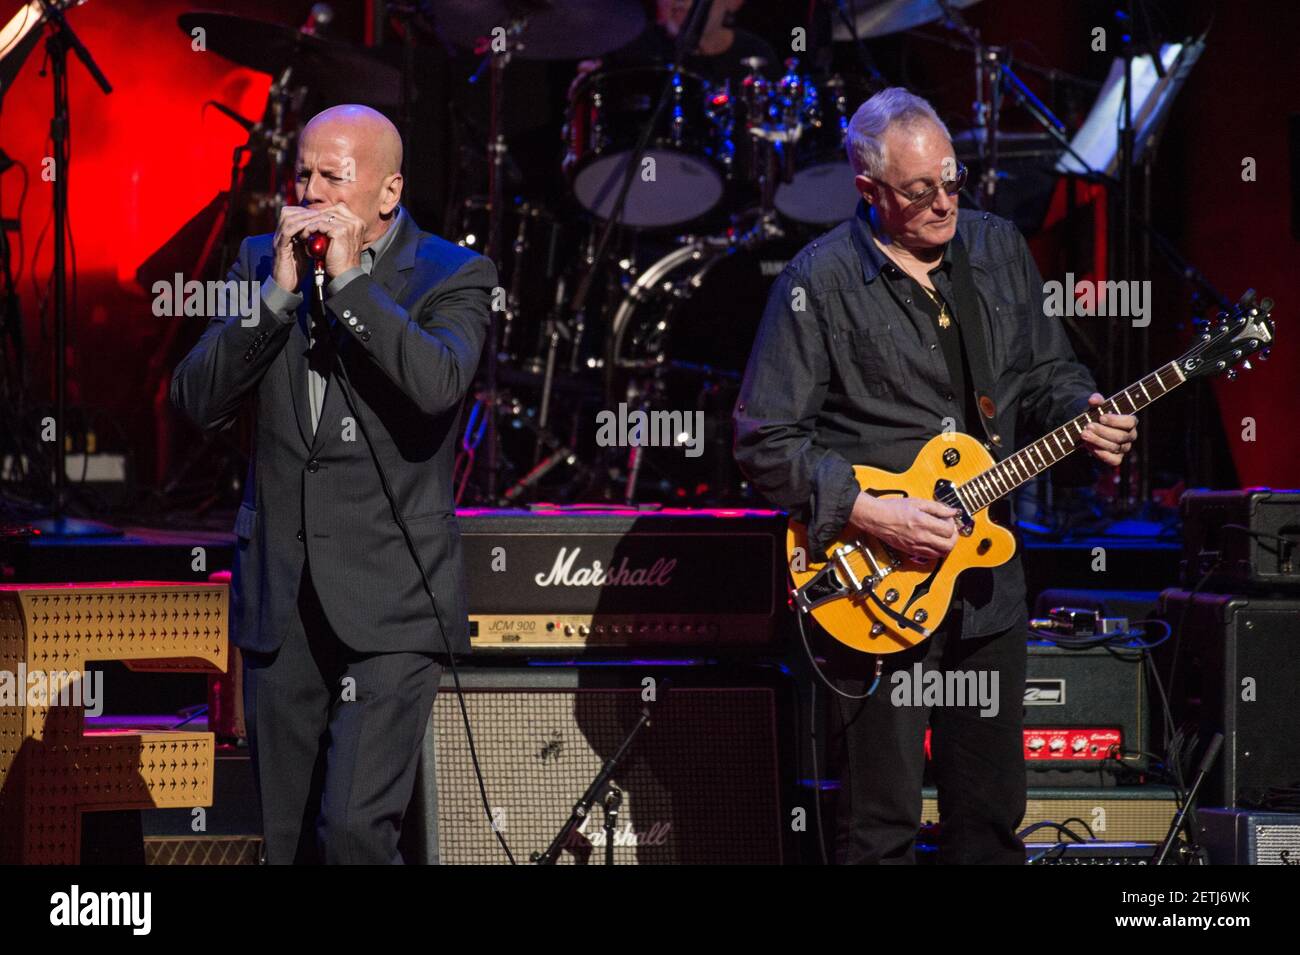 Bruce Willis plays harmonica on stage at Love Rocks NYC! A Change is Gonna  Come: Celebrating Songs of Peace, Love and Hope, a benefit concert for  God's Love We Deliver at Beacon